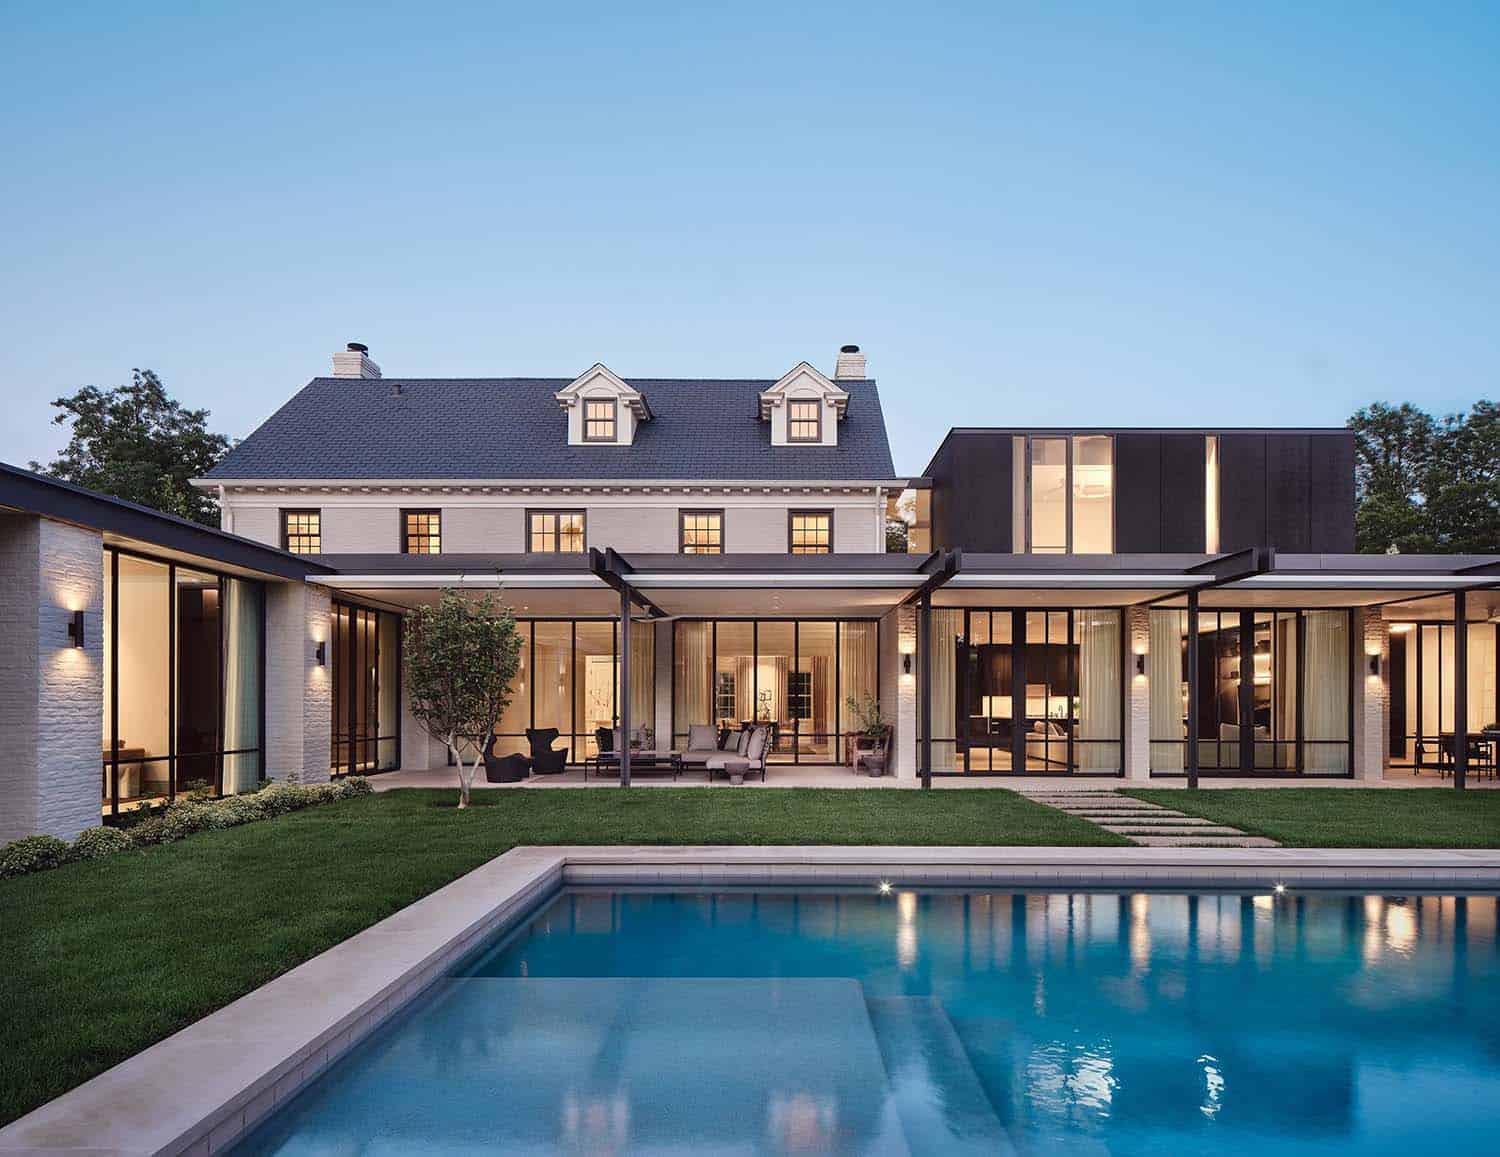 Georgian revival home exterior with a modern extension and a swimming pool